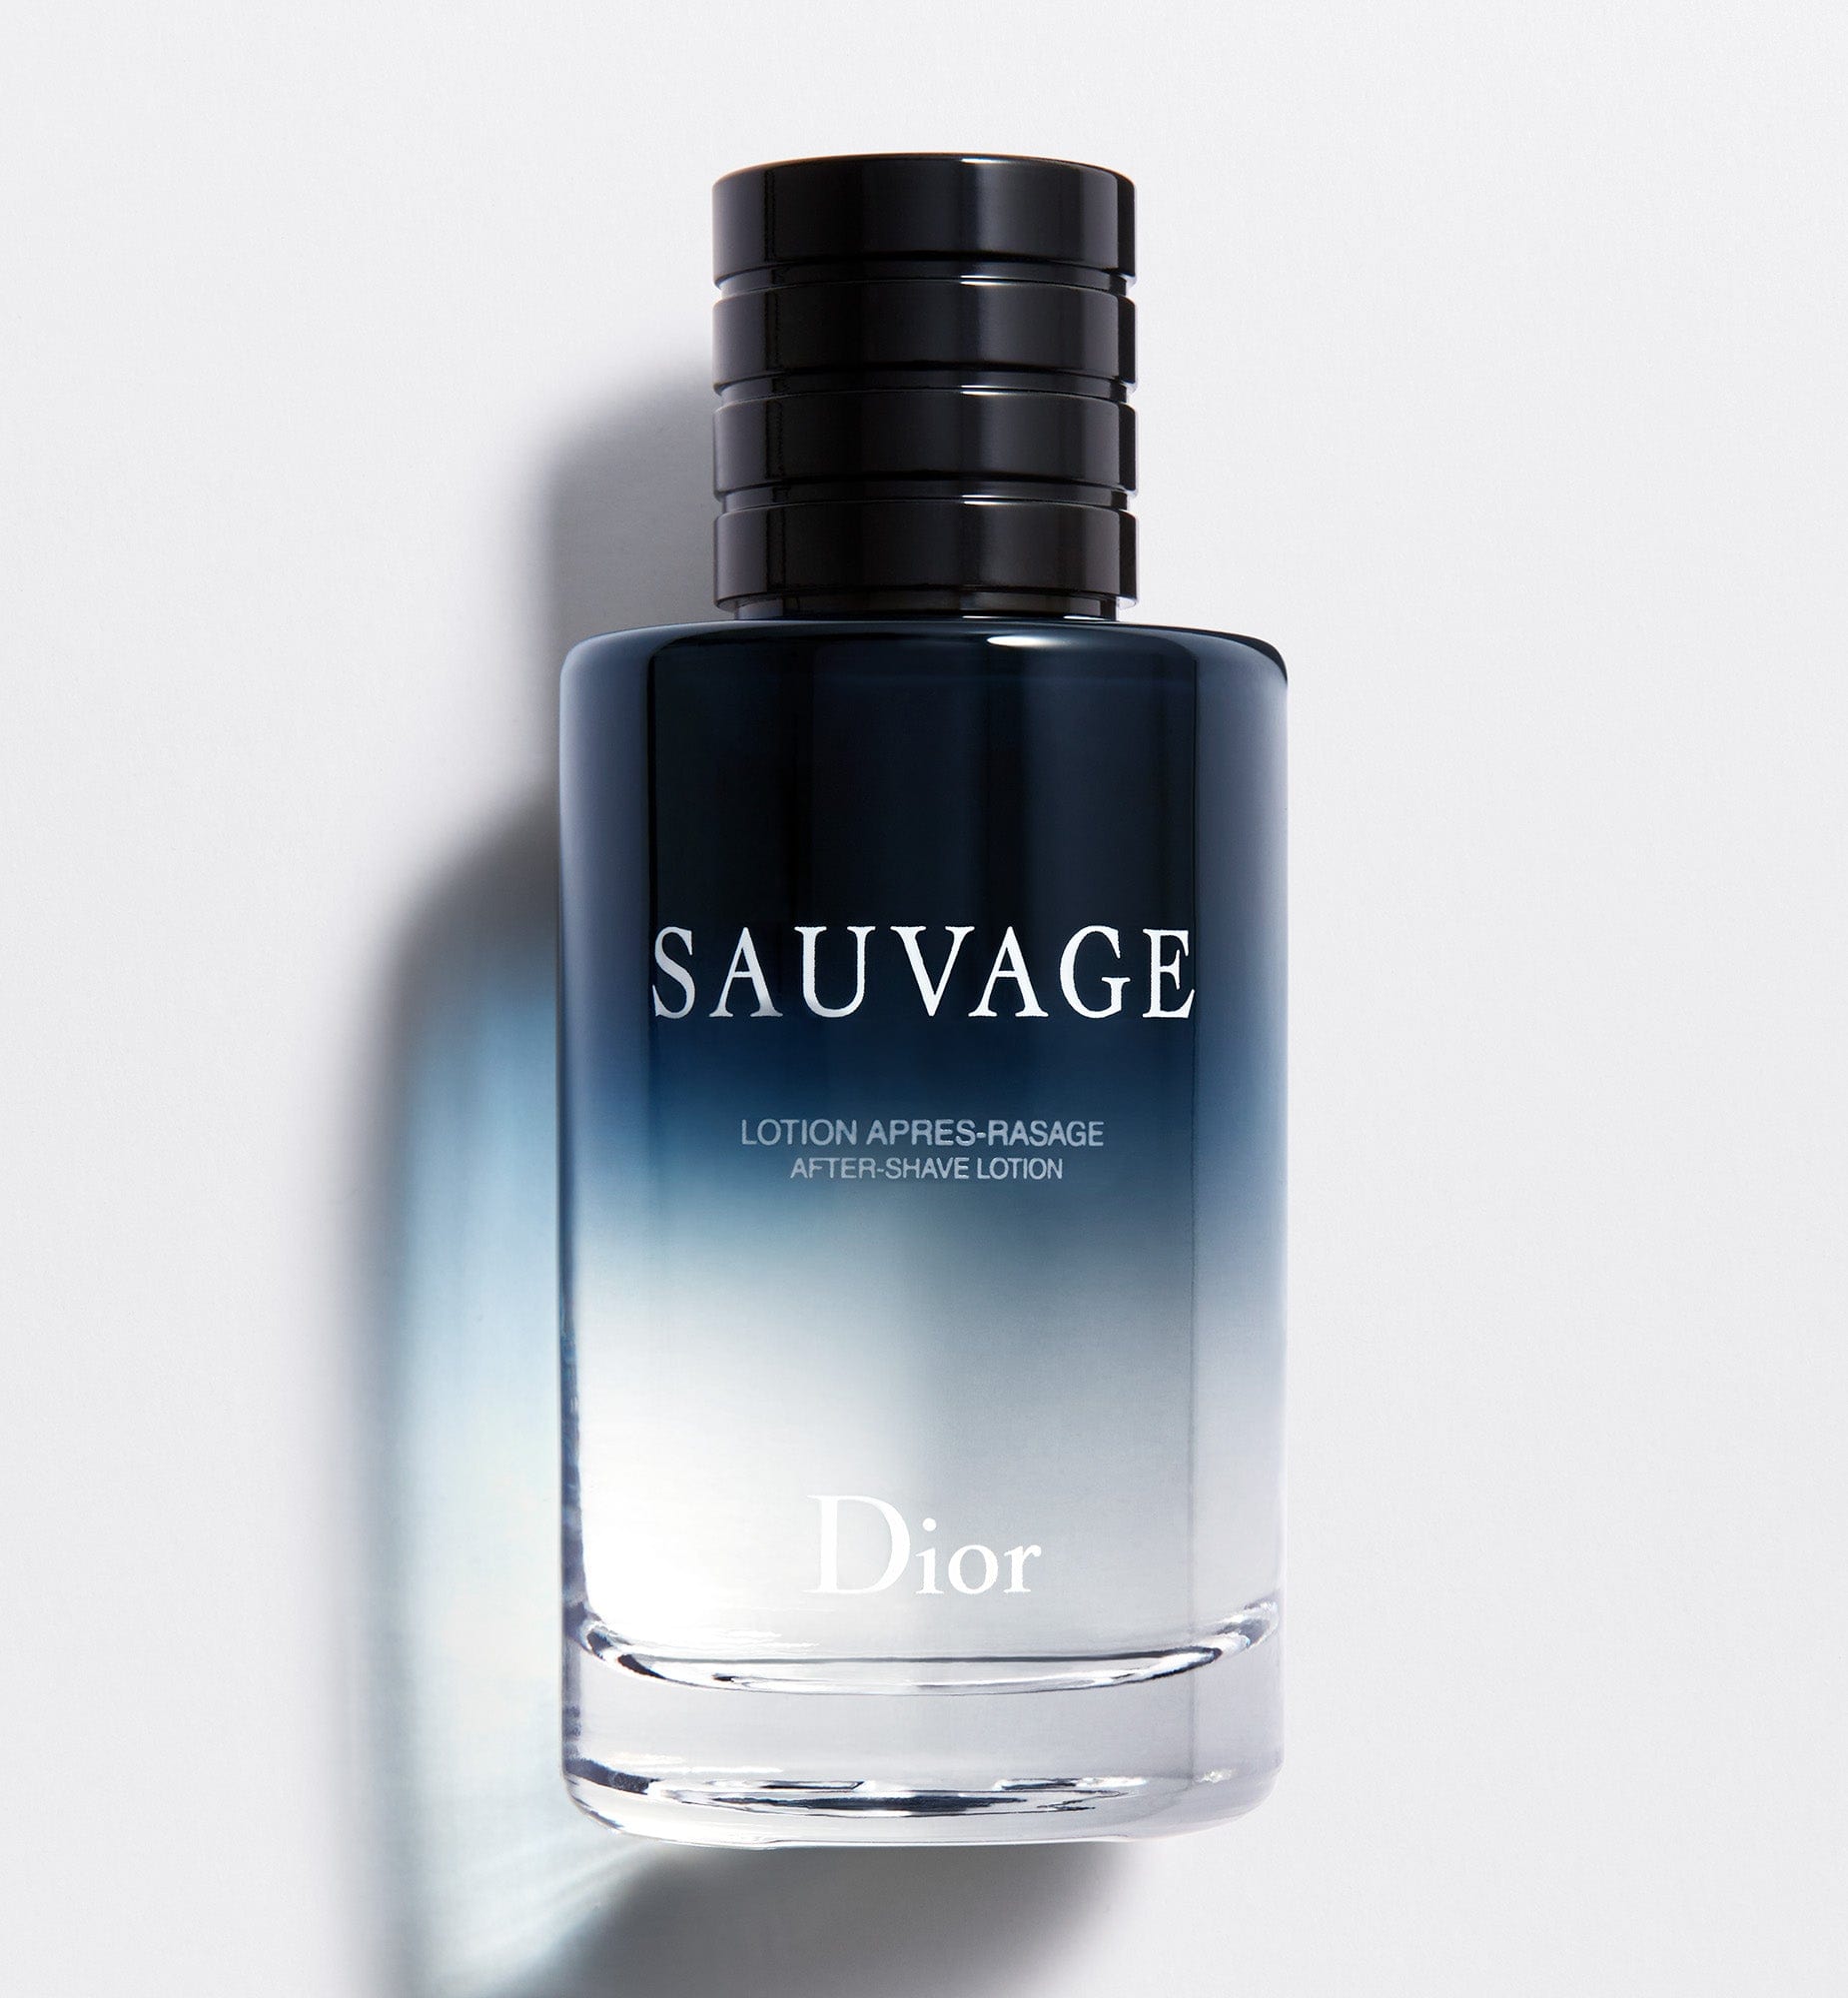 SAUVAGE After-shave lotion | Cleans and protects skin after shaving